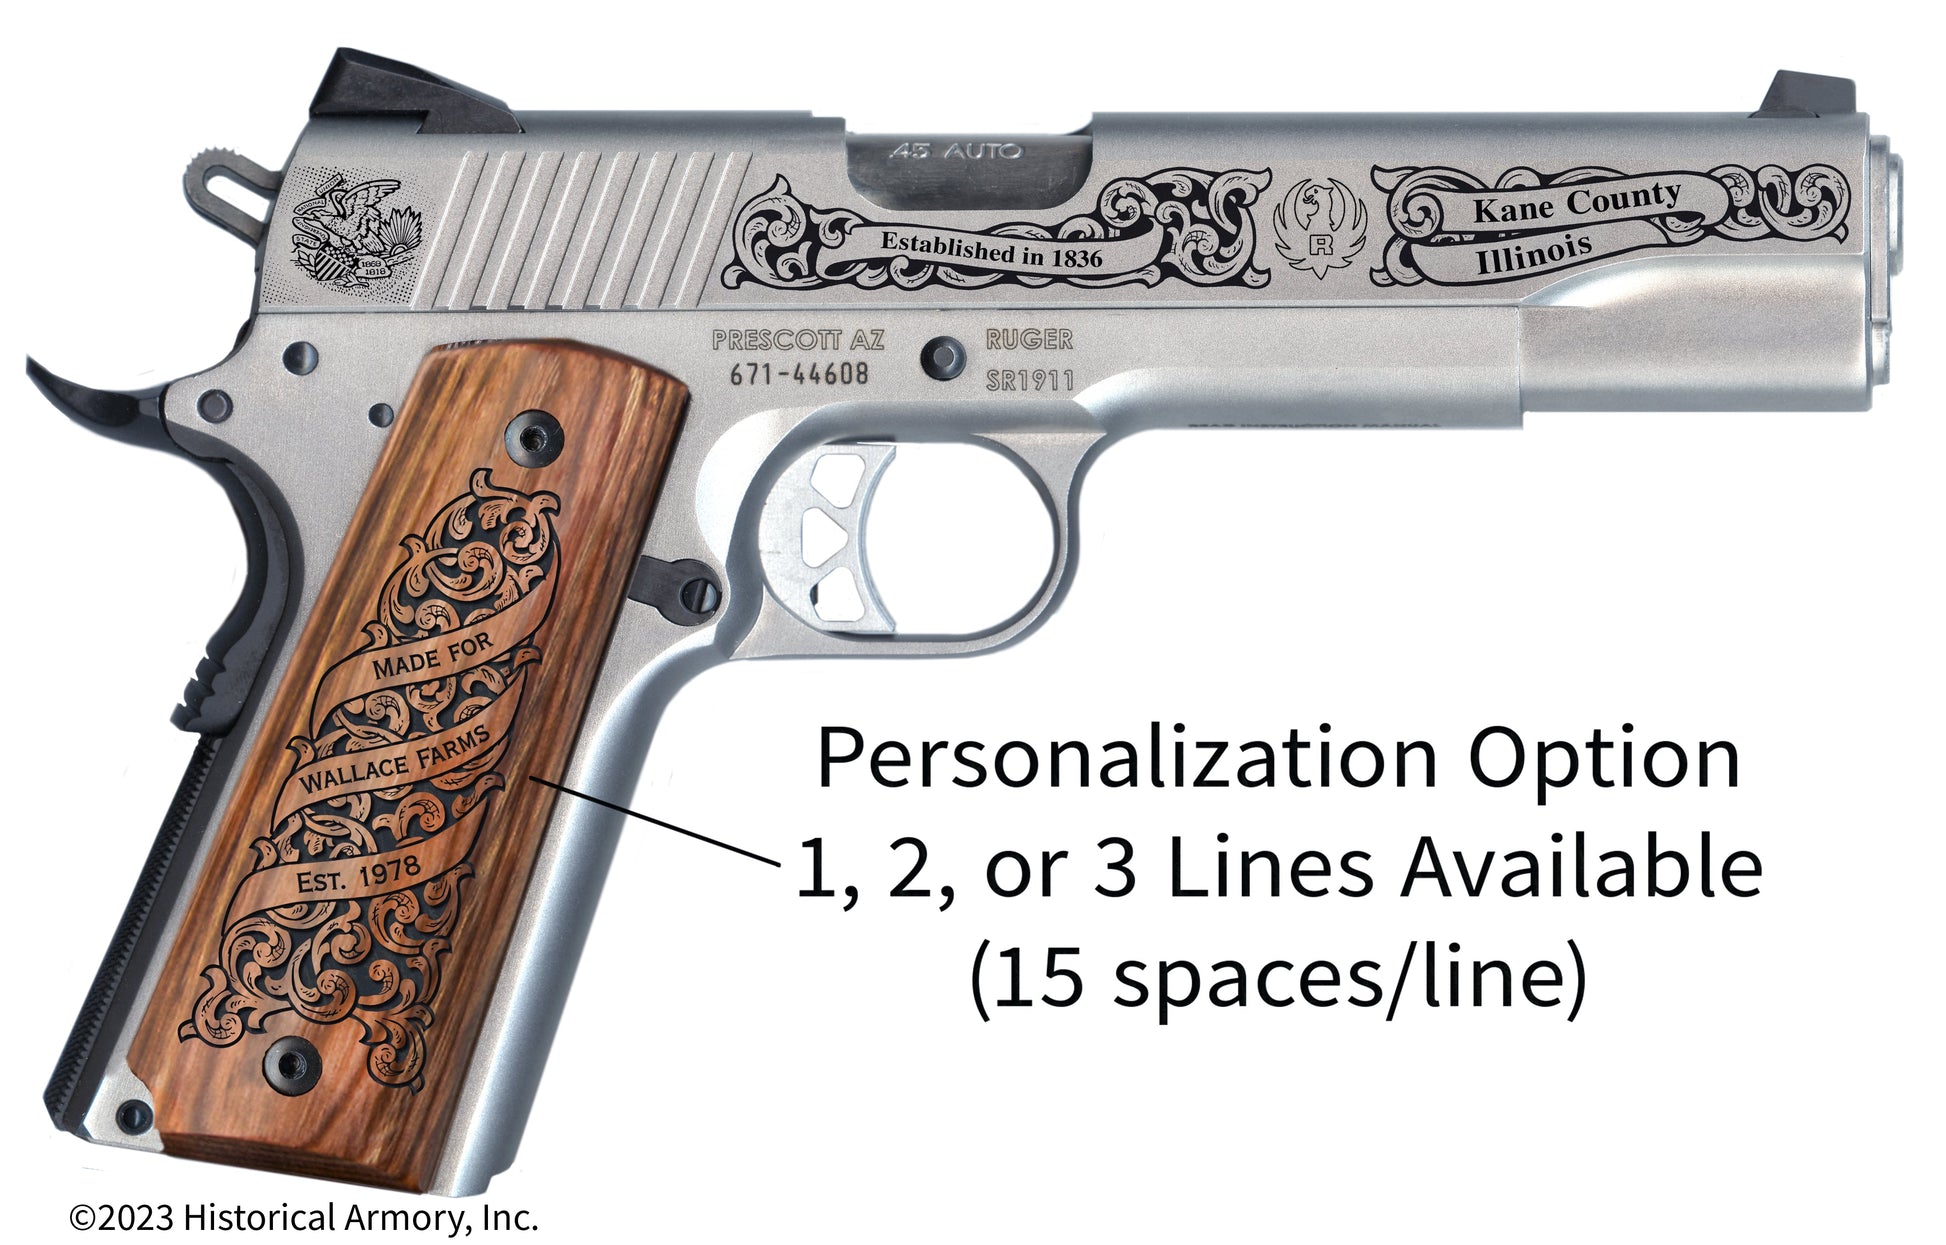 Kane County Illinois Personalized Engraved .45 Auto Ruger 1911